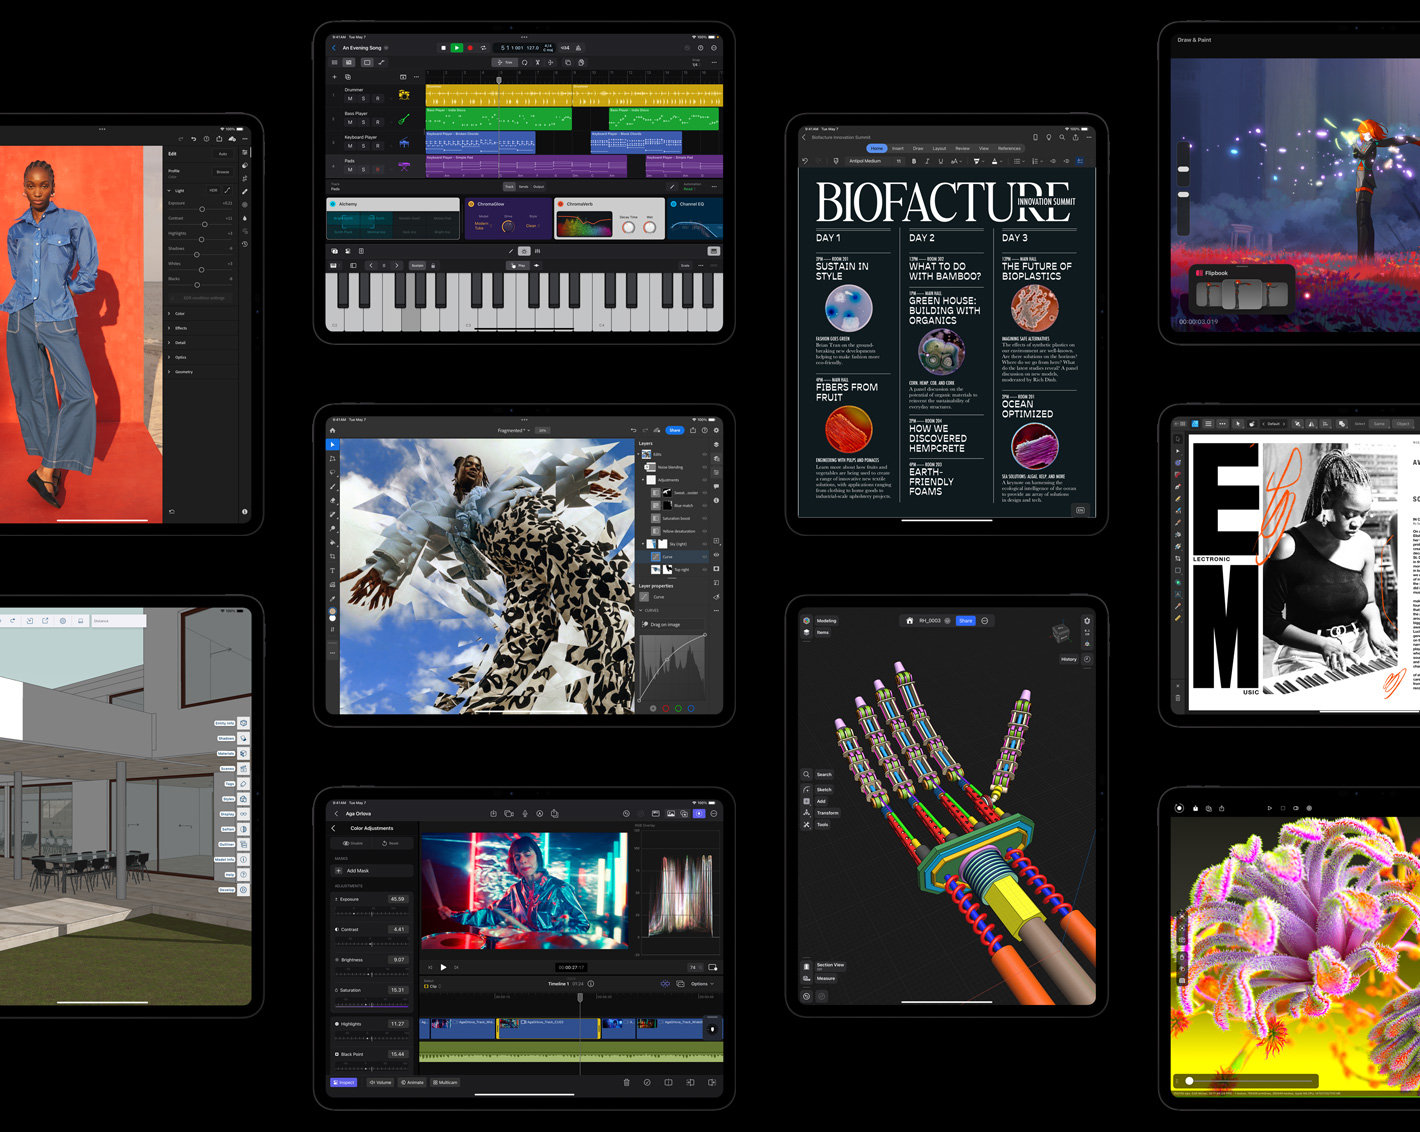 Ten iPad Pro displays showcasing different apps like - Adobe Lightroom for iPad, Trimble SketchUp, Logic Pro for iPad, Adobe Photoshop, Final Cut Pro for iPad, Microsoft Word, Shapr3D, Procreate Dreams, Affinity Designer 2 for iPad, Octane